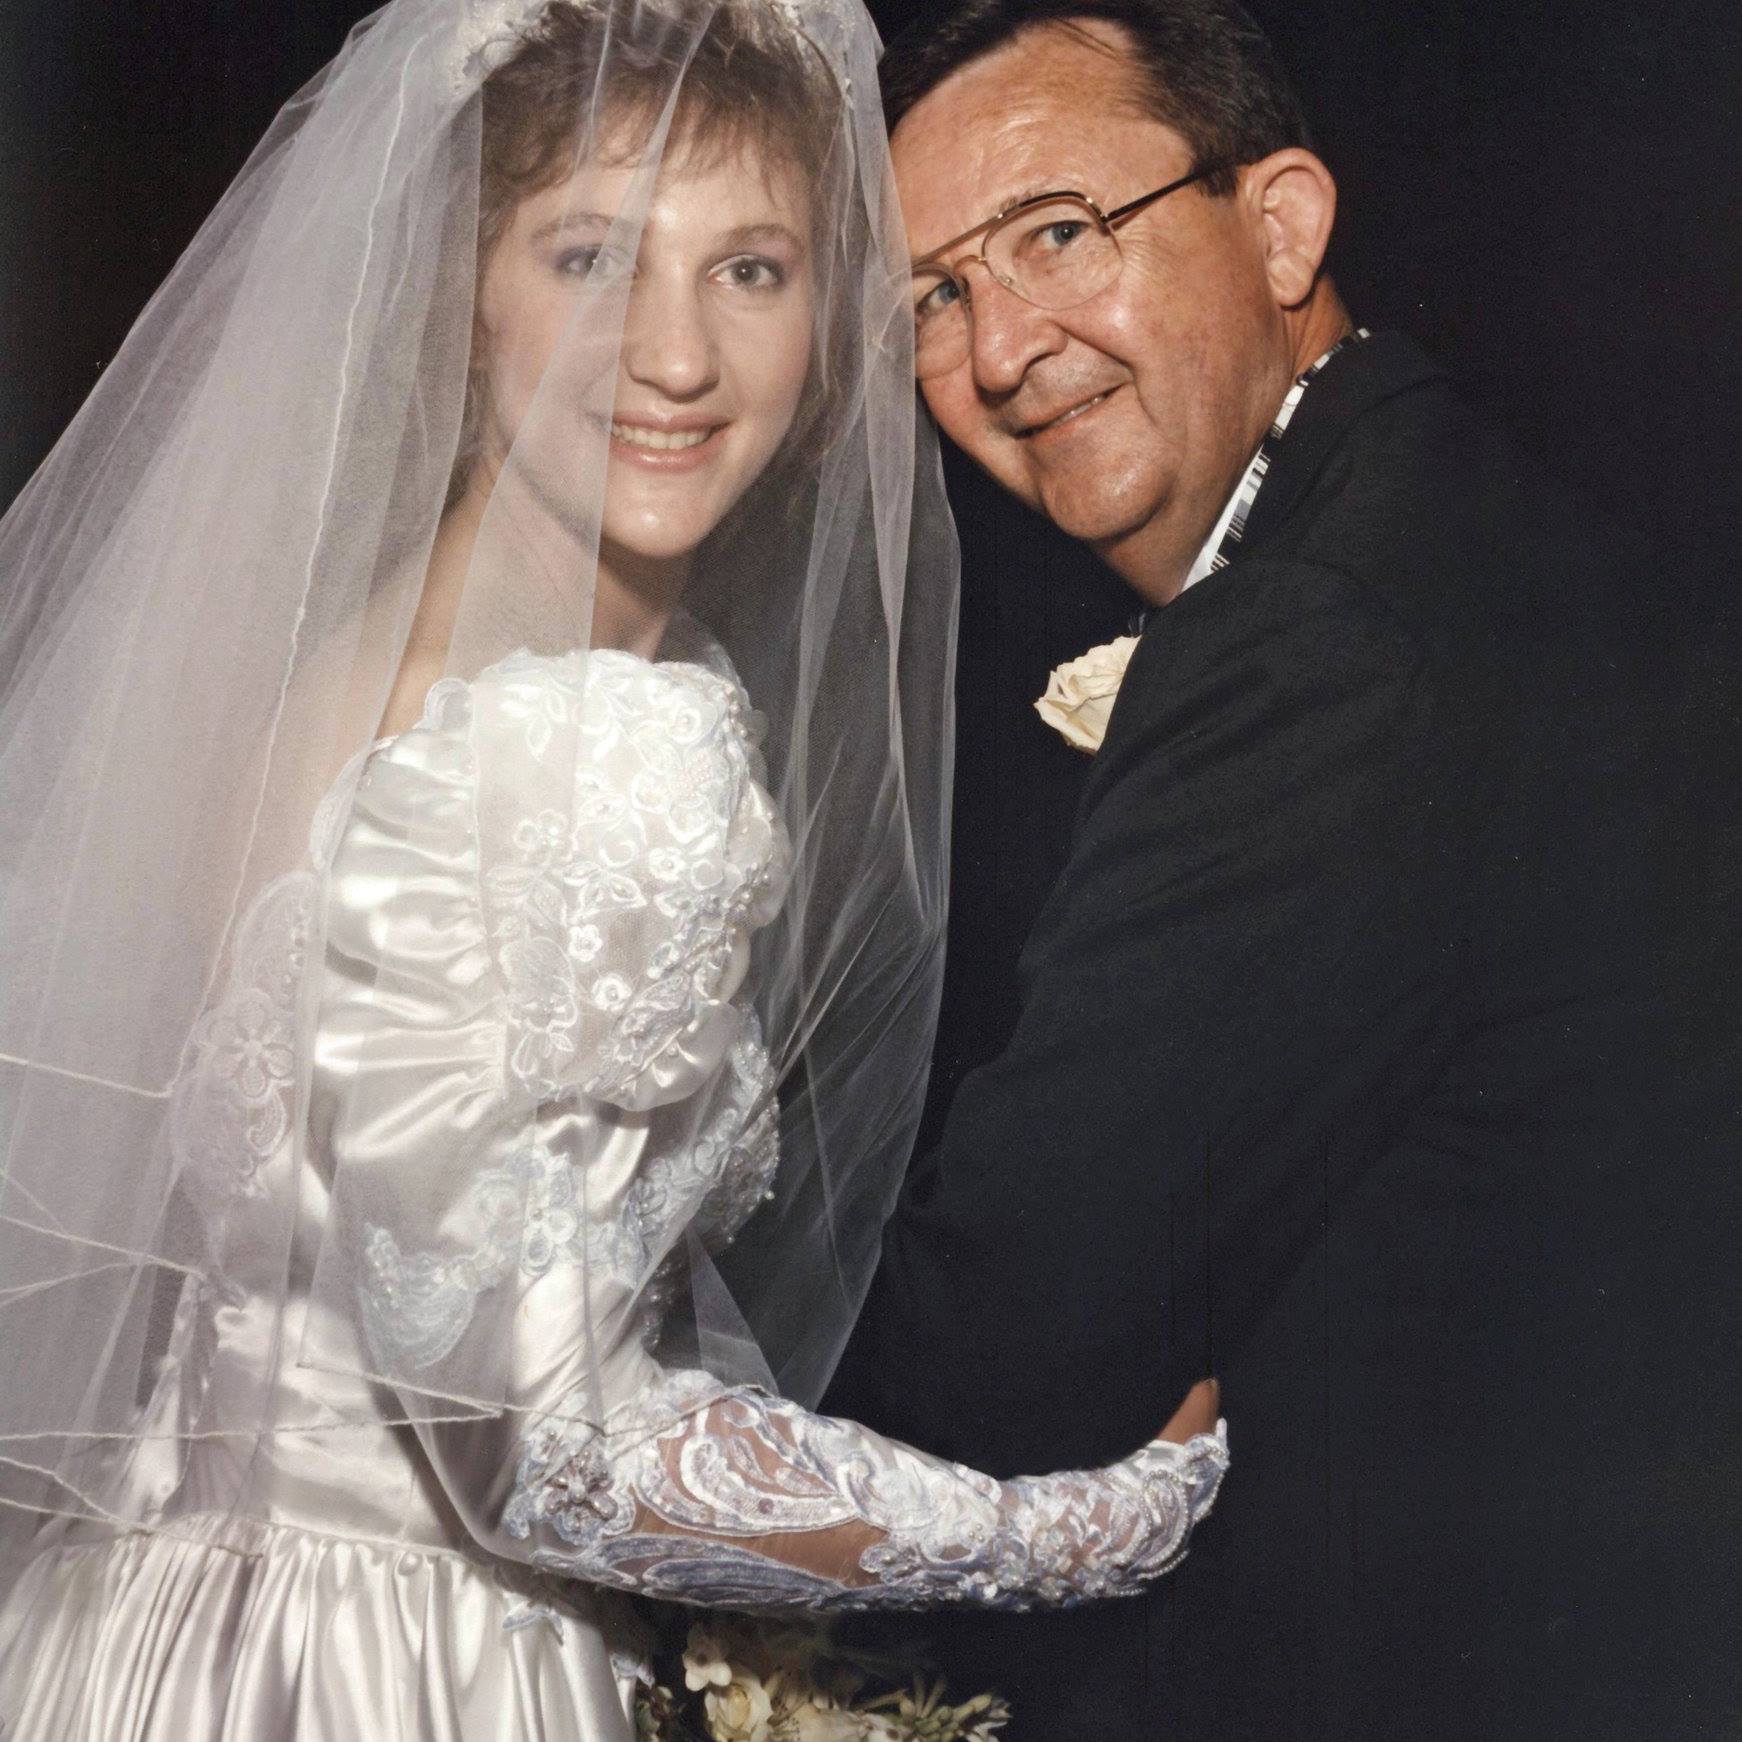 Susanne with her father about to go down the aisle on her wedding day wearing white wedding dress and veil.